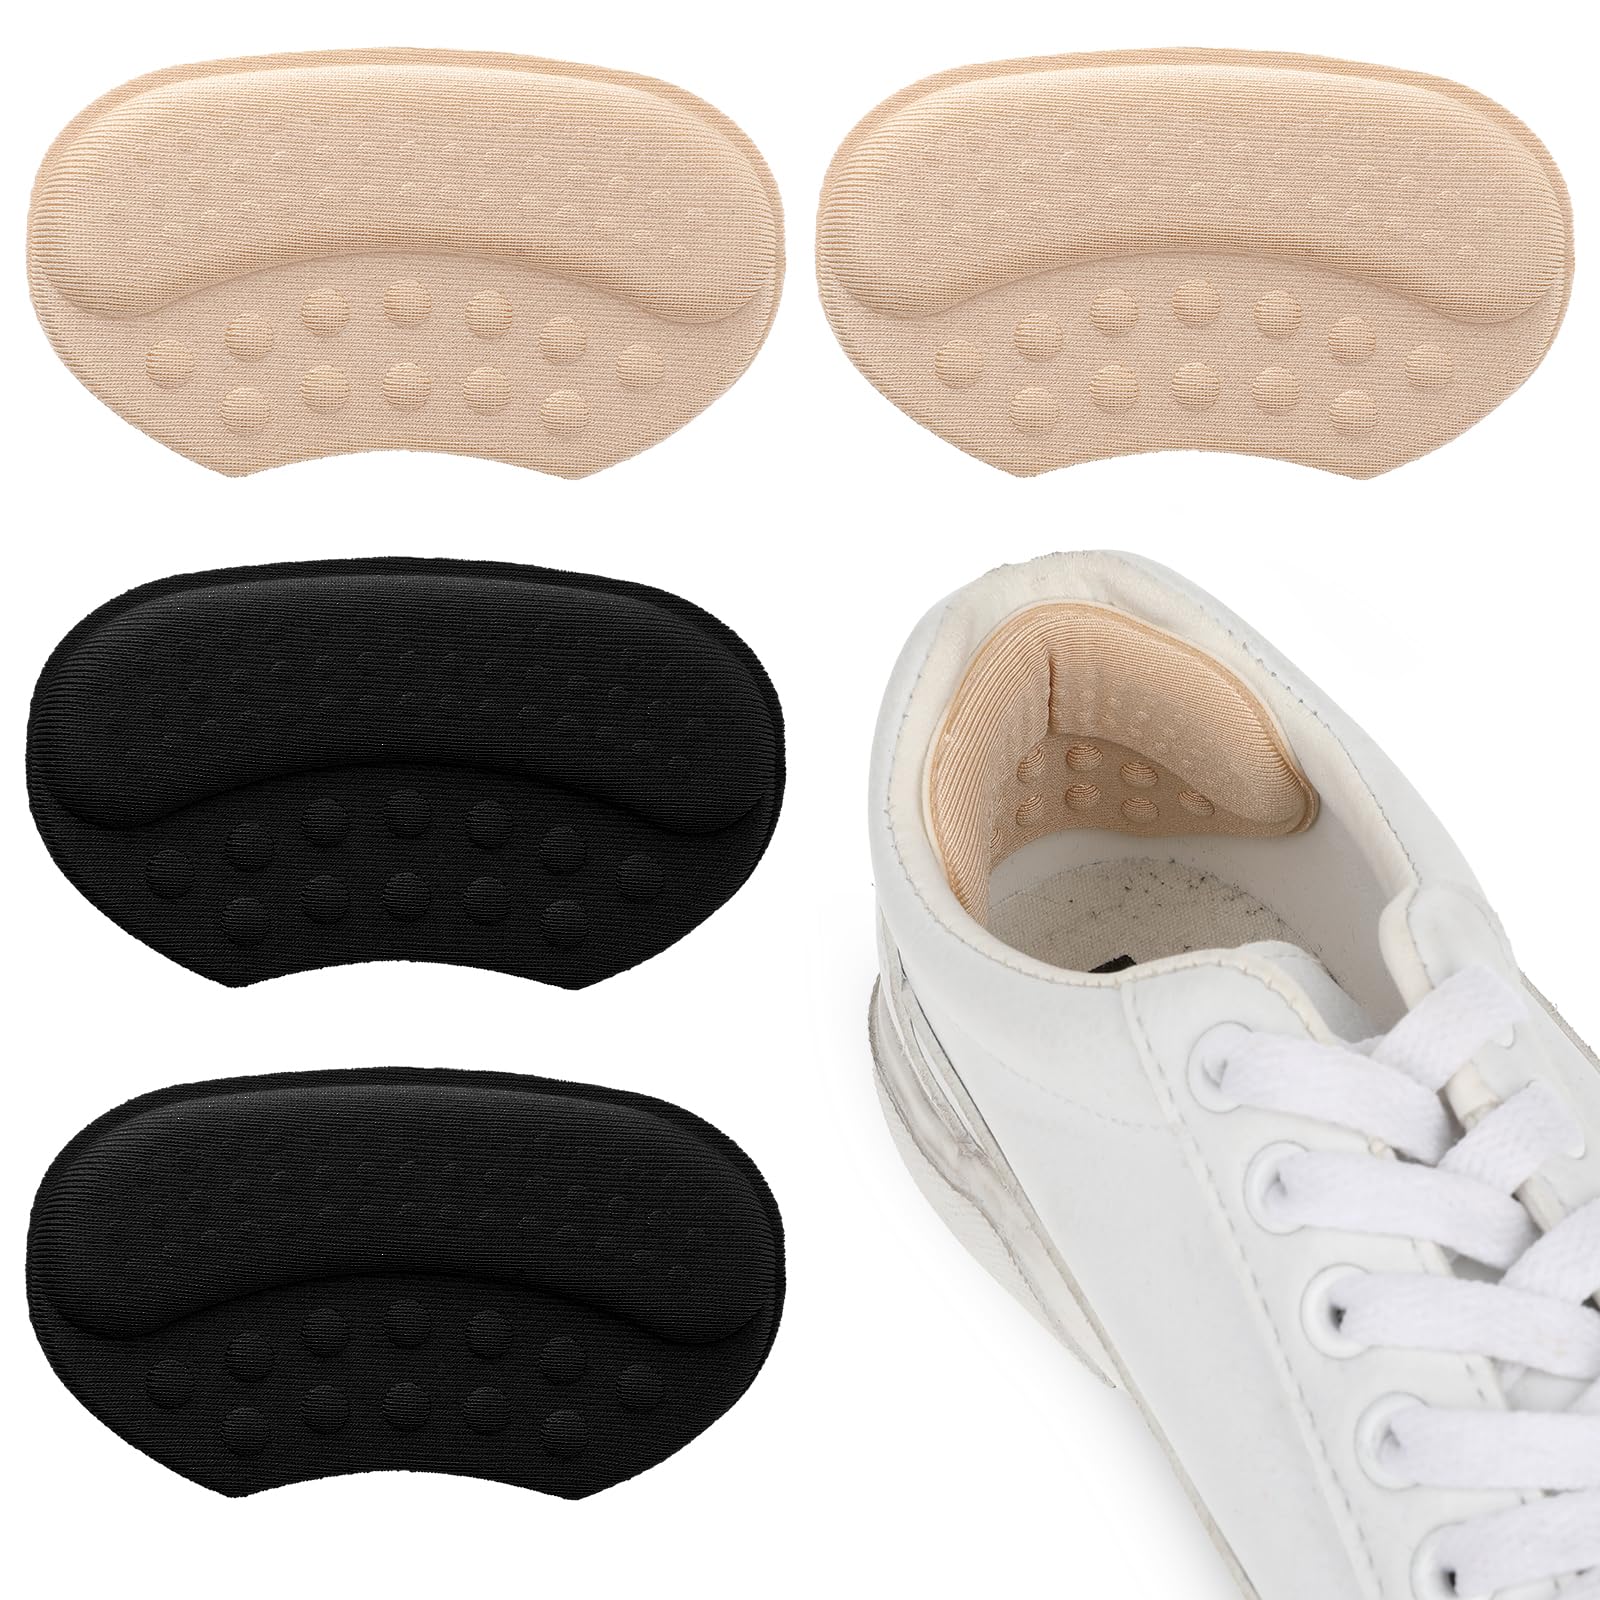 Amazon.com: 8Pair Shoe Patches for Holes, Self-Adhesive Shoe Heel Repair,  Shoe Hole Repair for Sneaker, Leather Shoes, High Heels (Black)… : Health &  Household